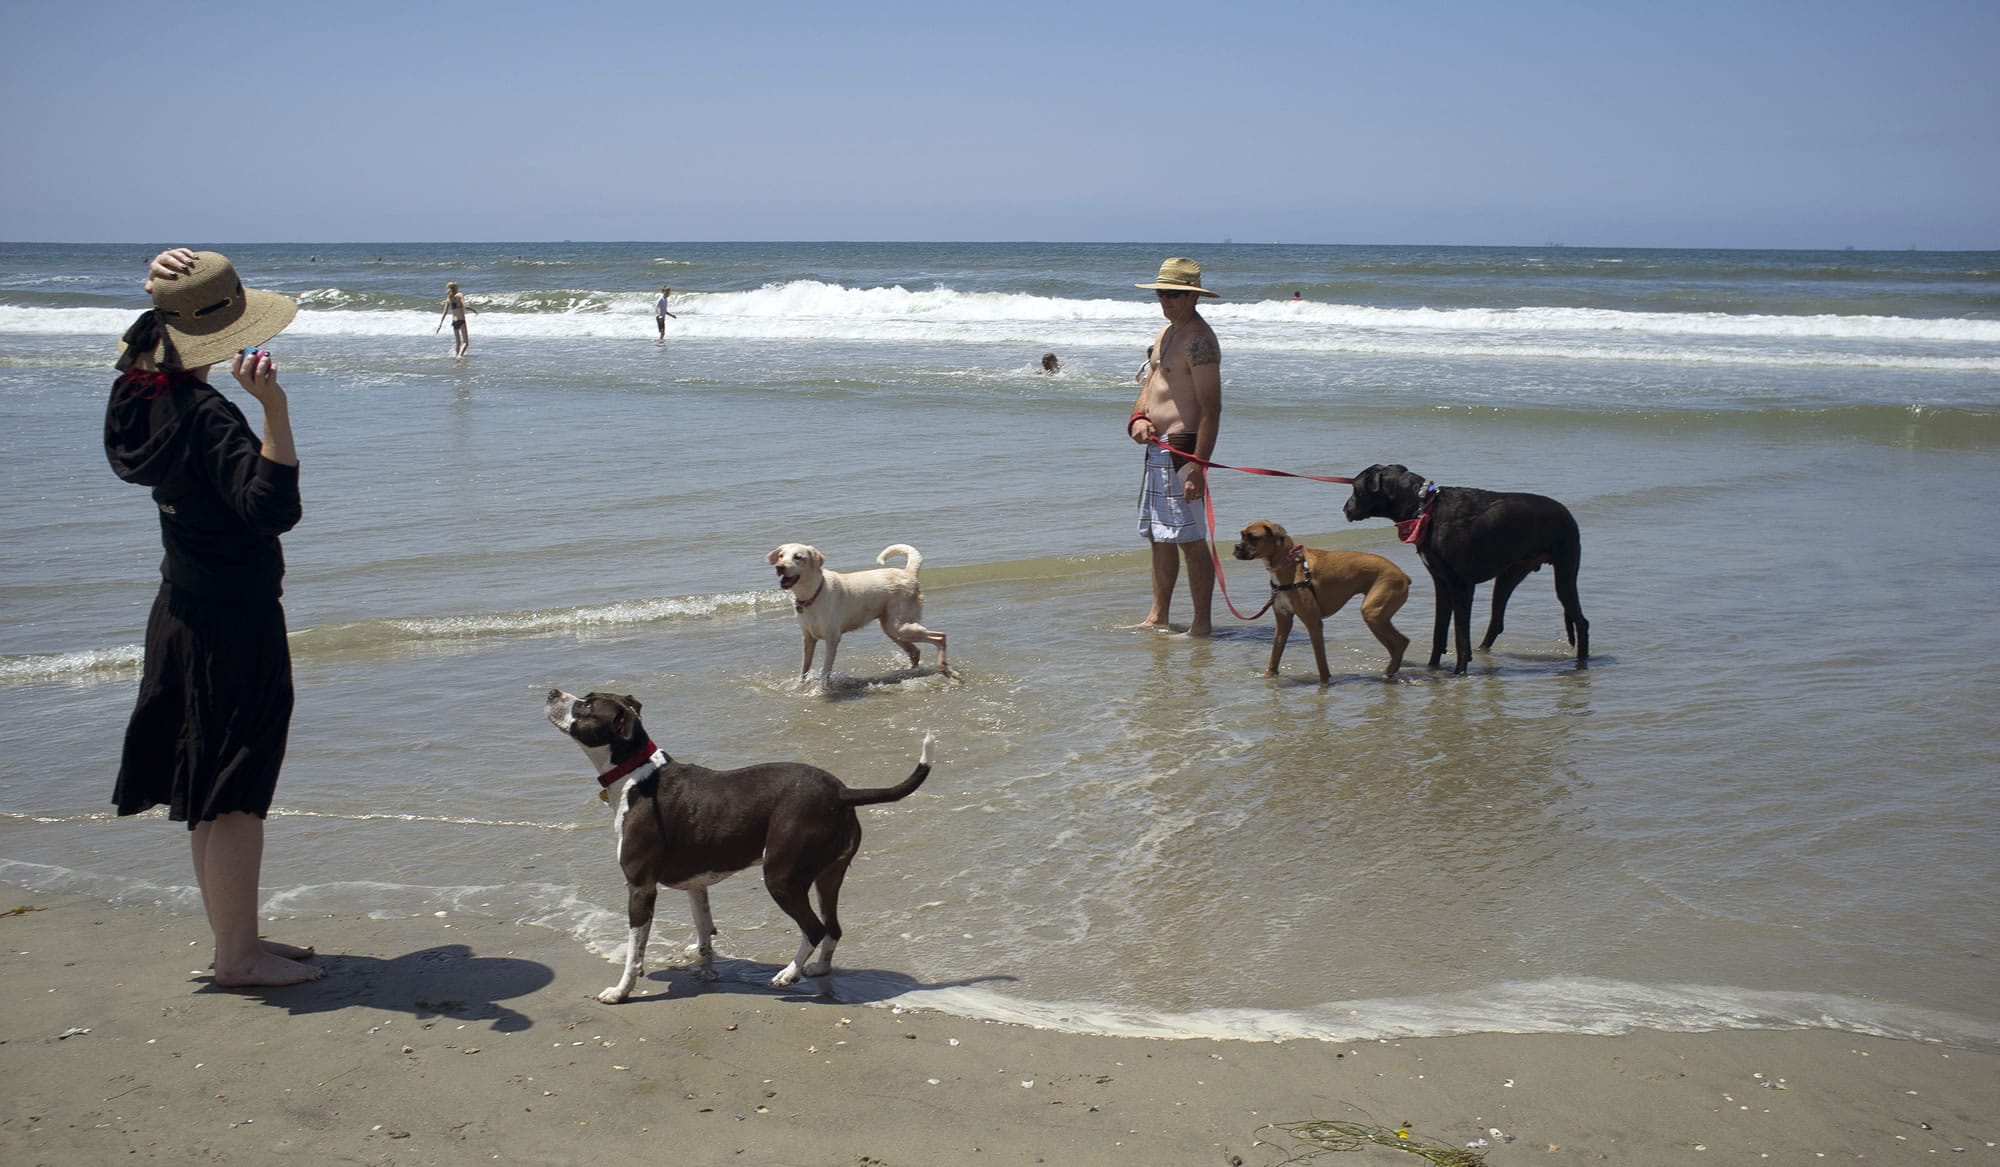 Dogs and their owners play in May at the Huntington Dog Beach in Huntington Beach, Calif., also known as Surf City USA.